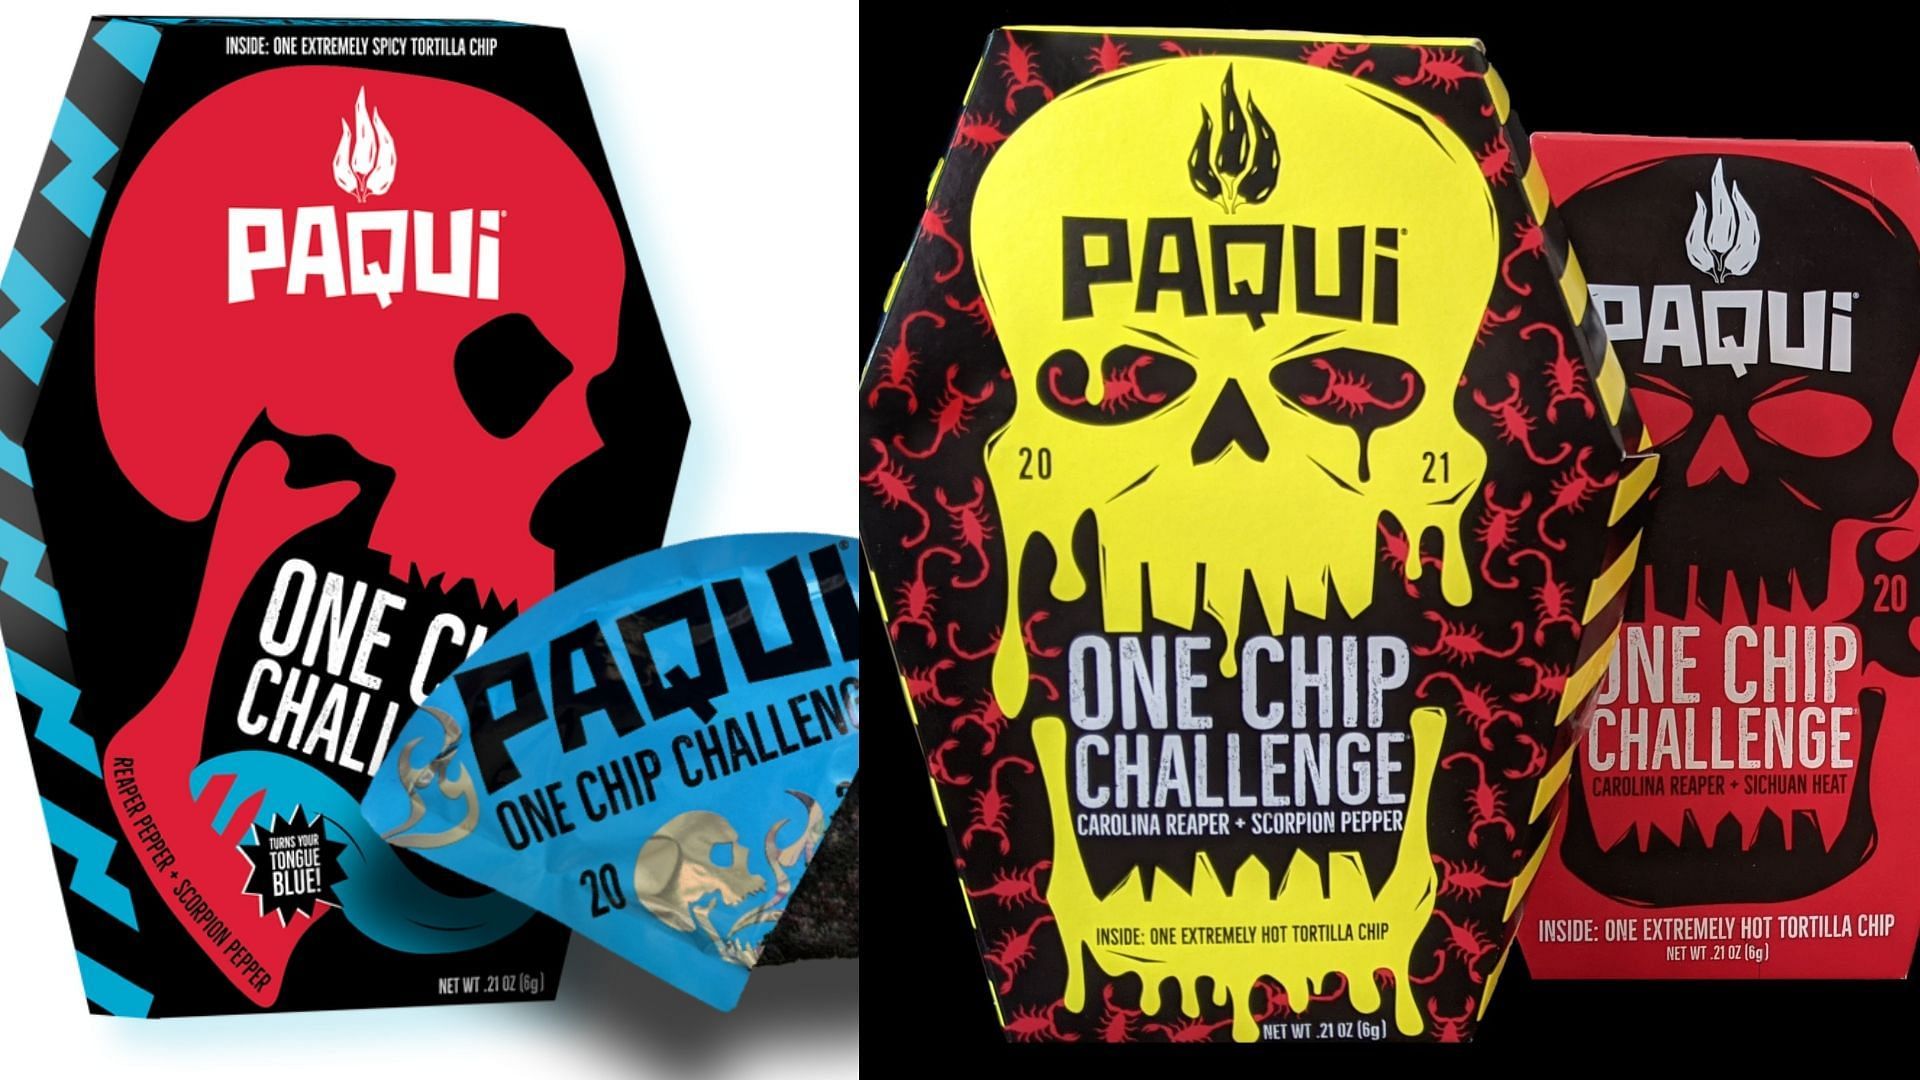 Paqui Challenges Customers to Try the 'World's Hottest Chip' - CStore  Decisions